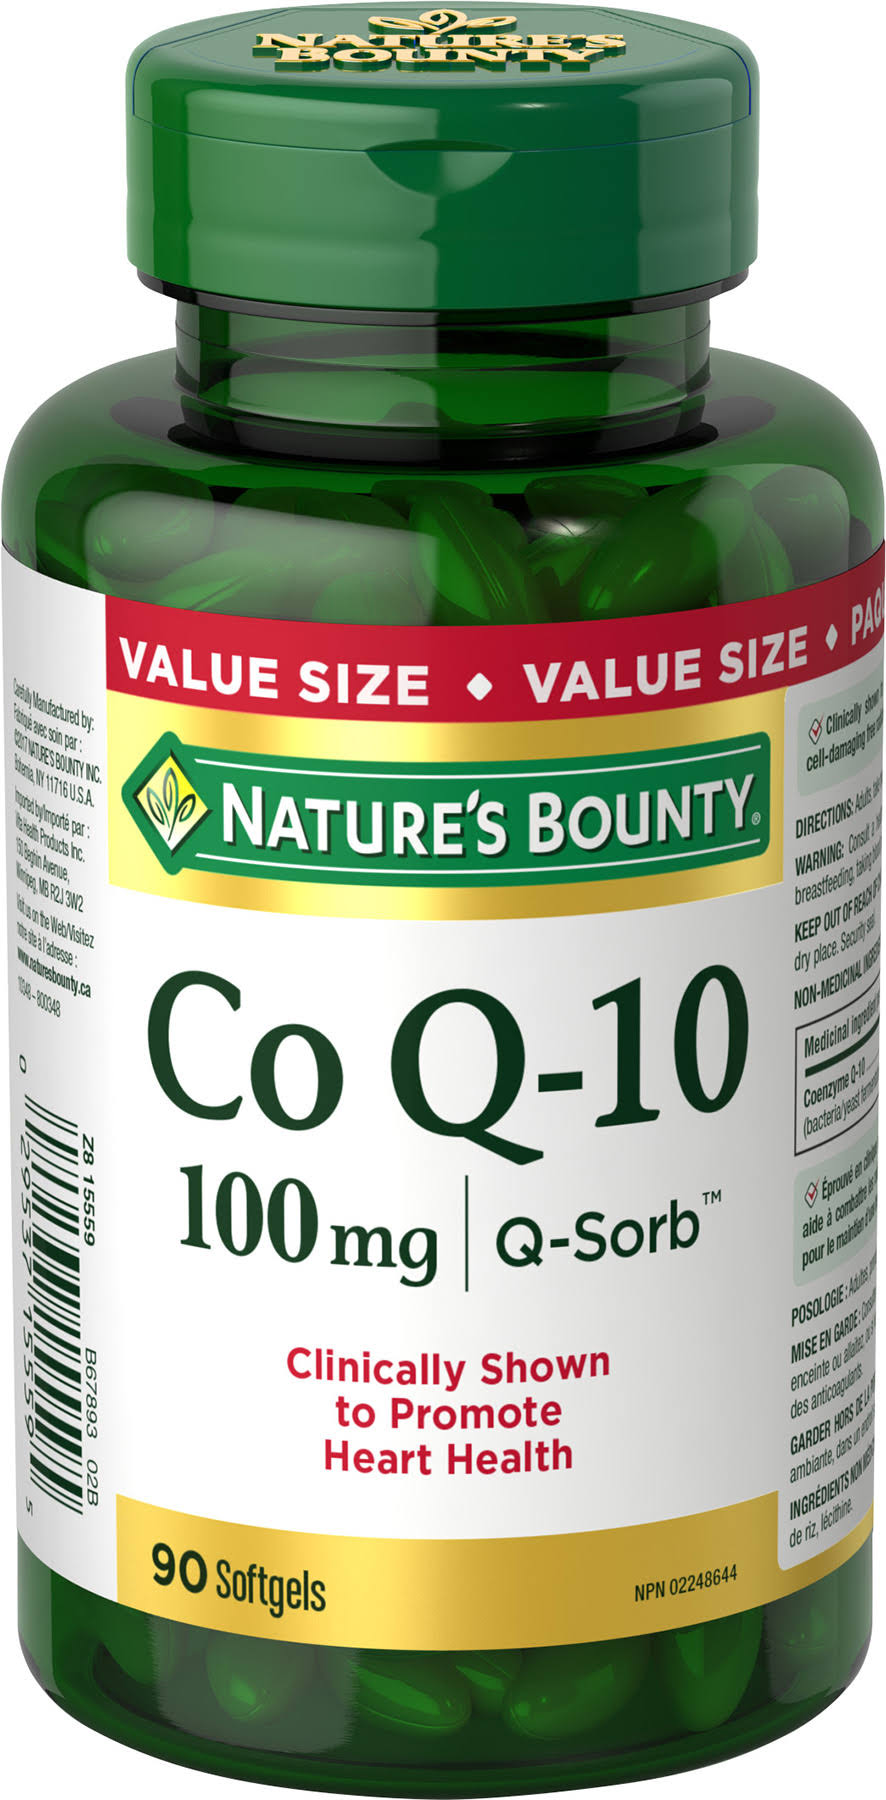 Nature's Bounty CO-Q10 Supplement - 100mg, 90ct